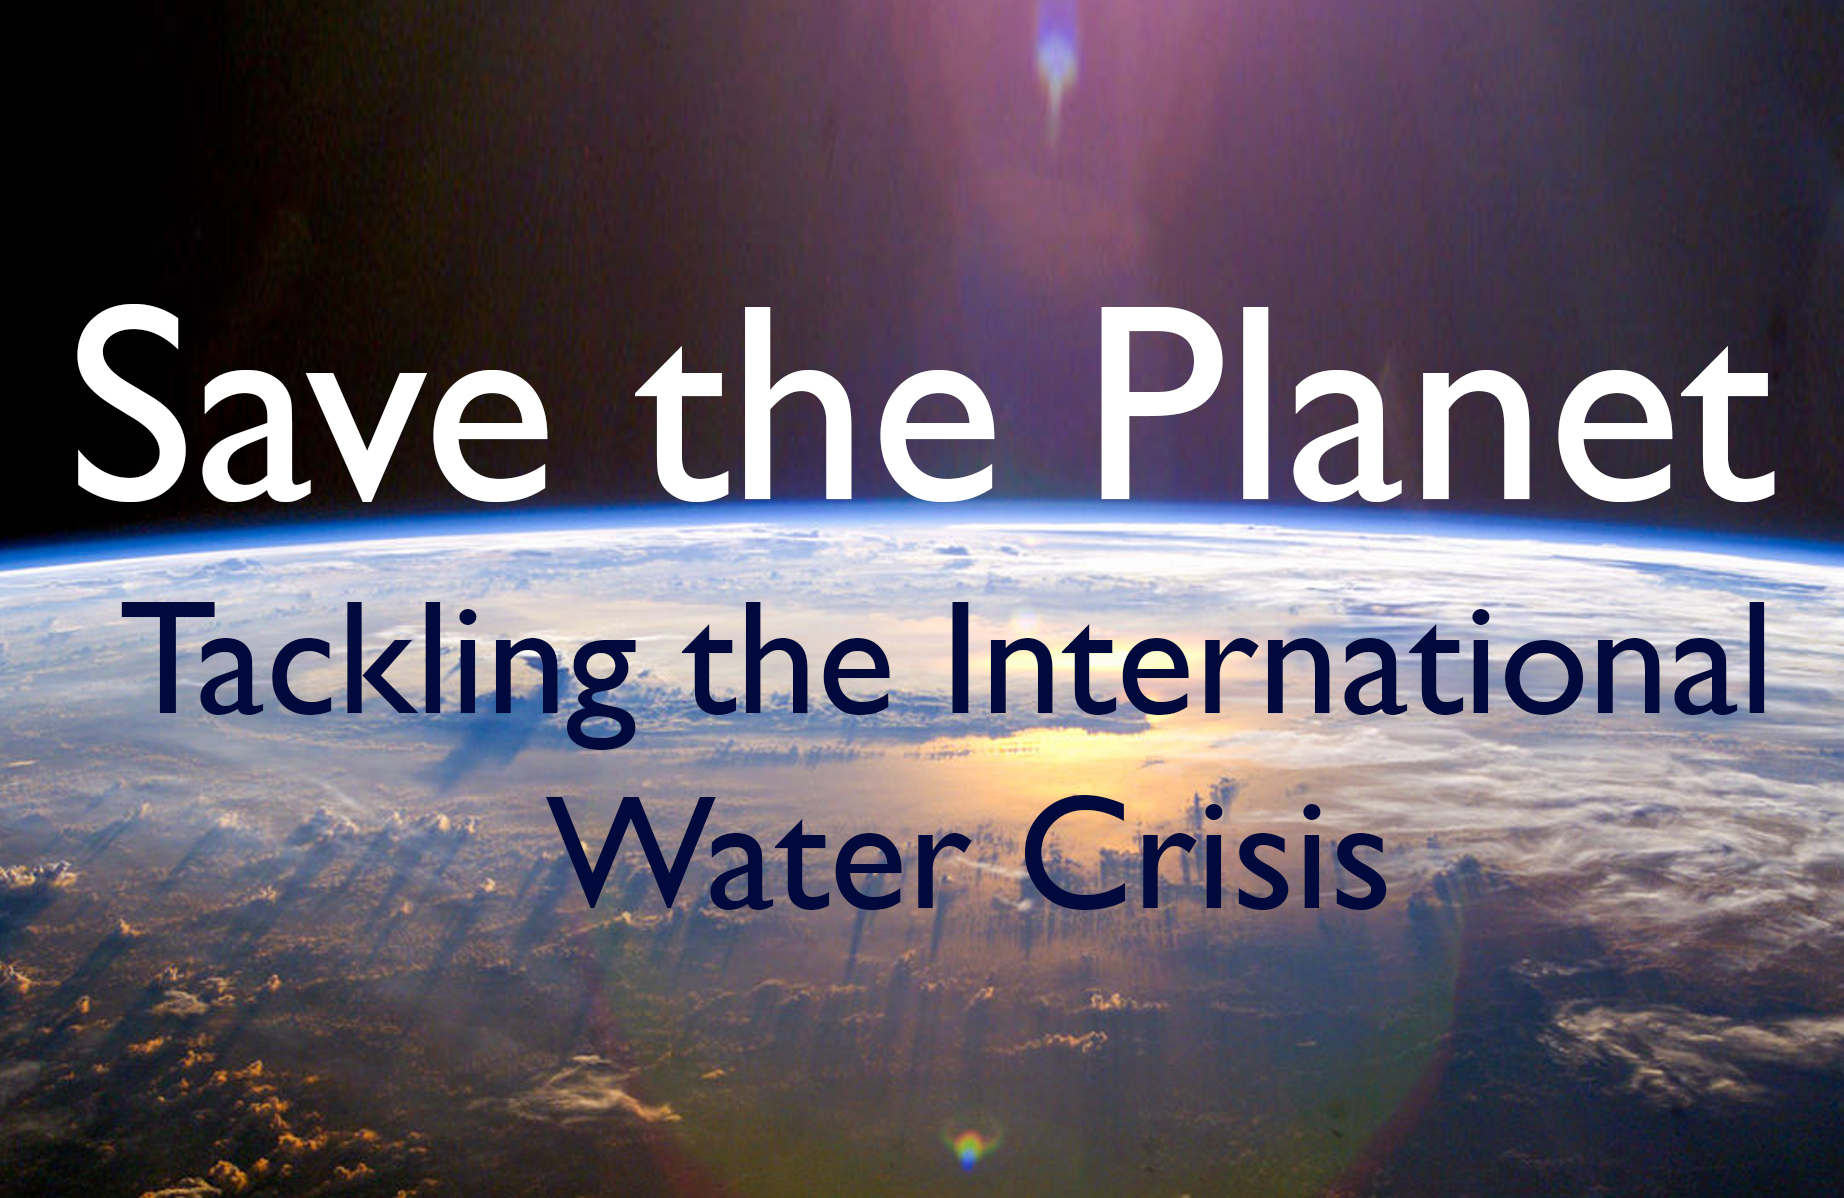 Breaking Free of Scarcity: Solutions to the International Water Crisis